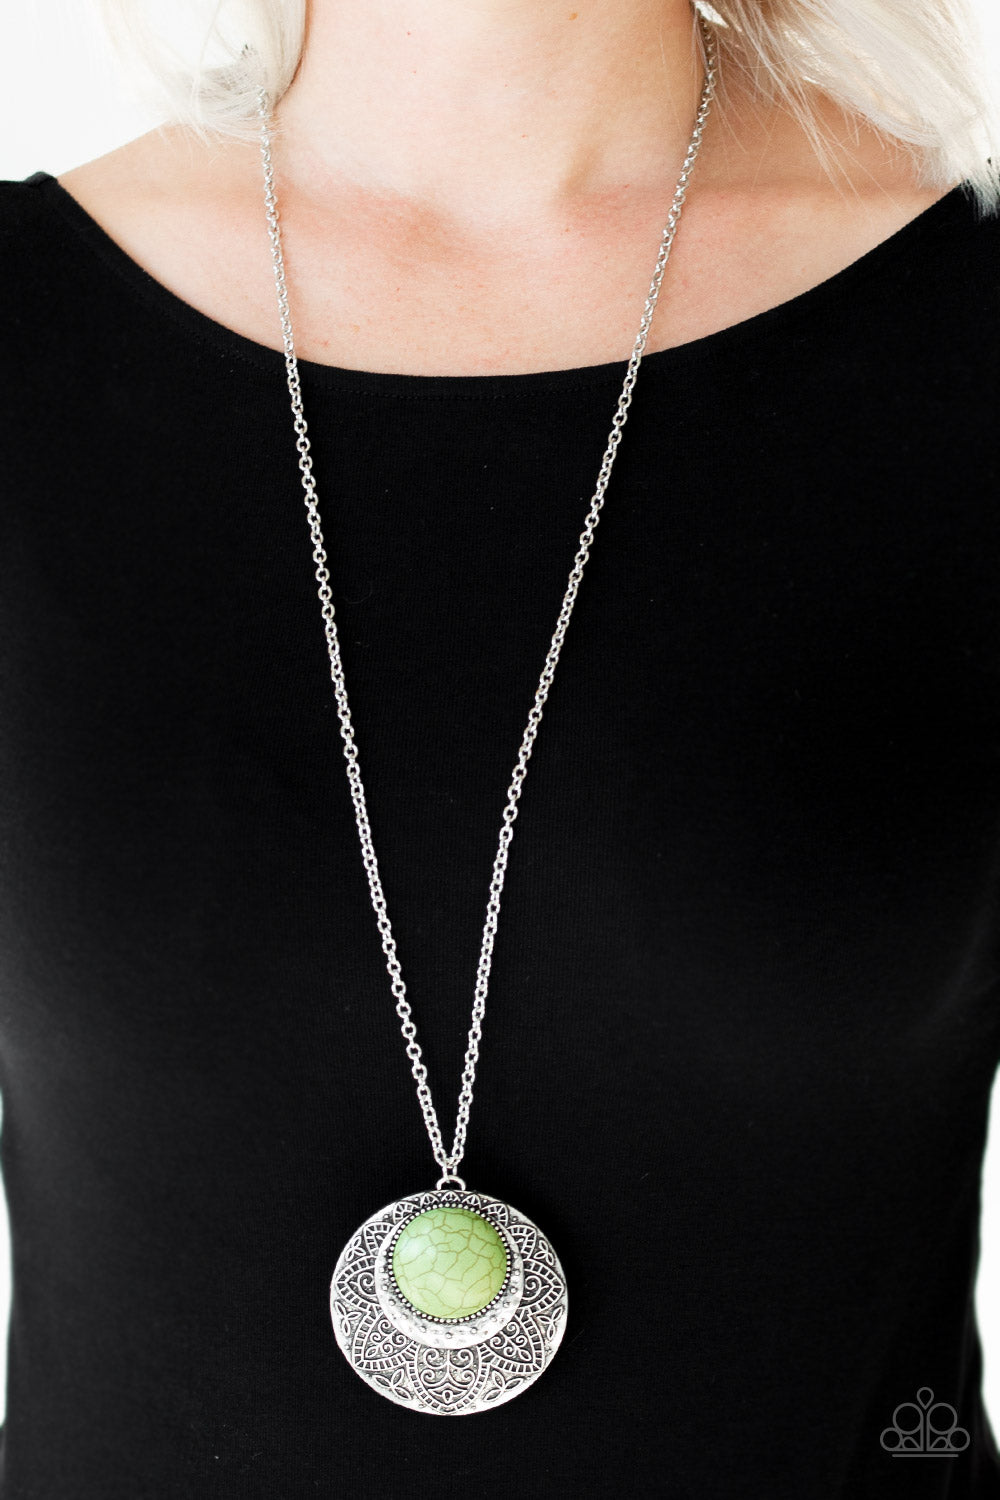 Medallion Meadow Green
Necklace Paparazzi